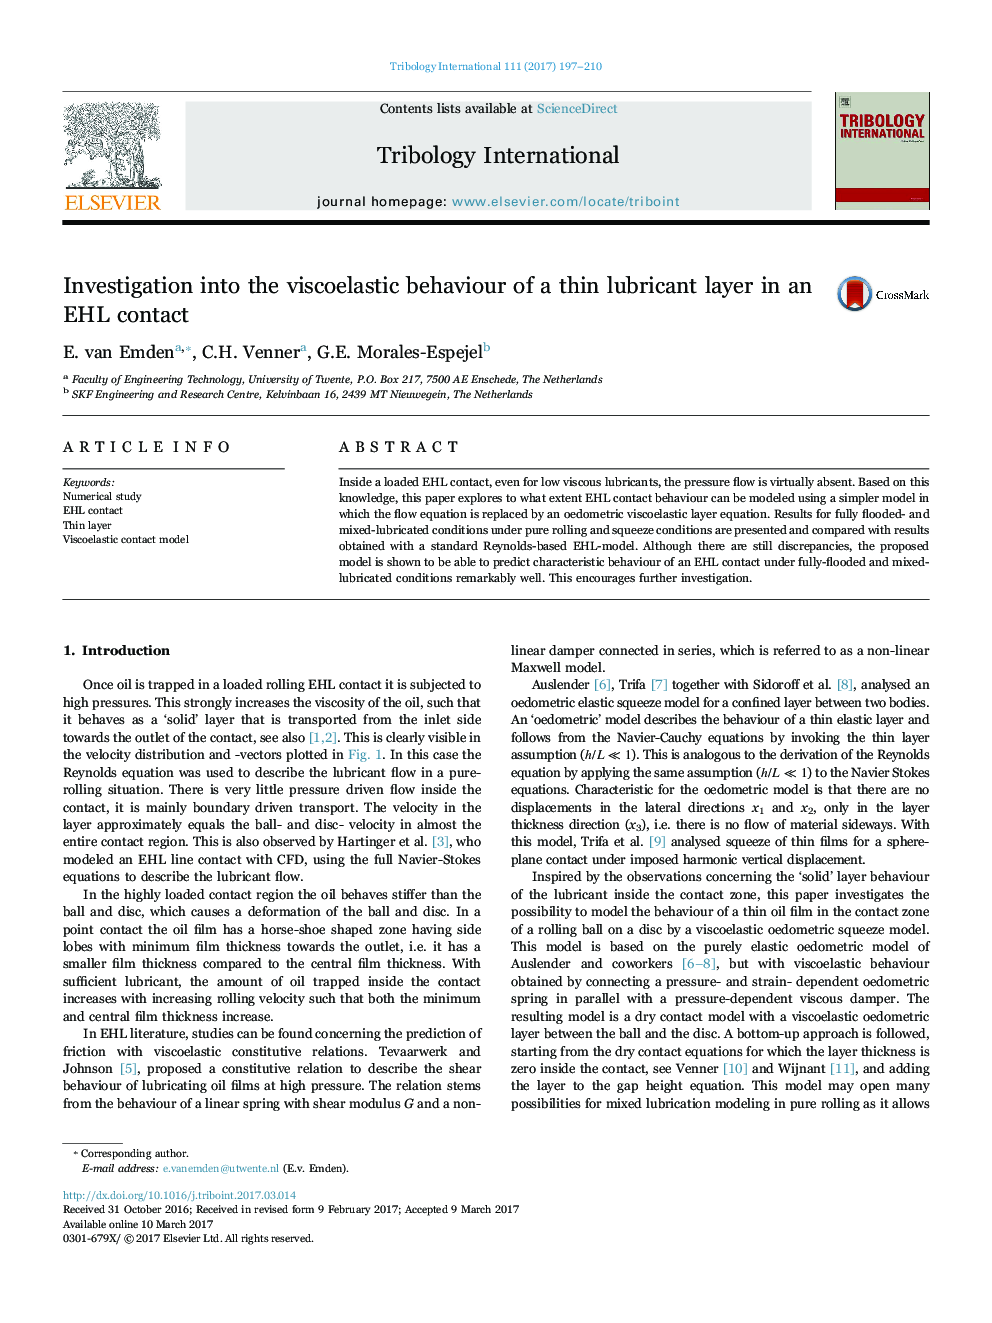 Investigation into the viscoelastic behaviour of a thin lubricant layer in an EHL contact